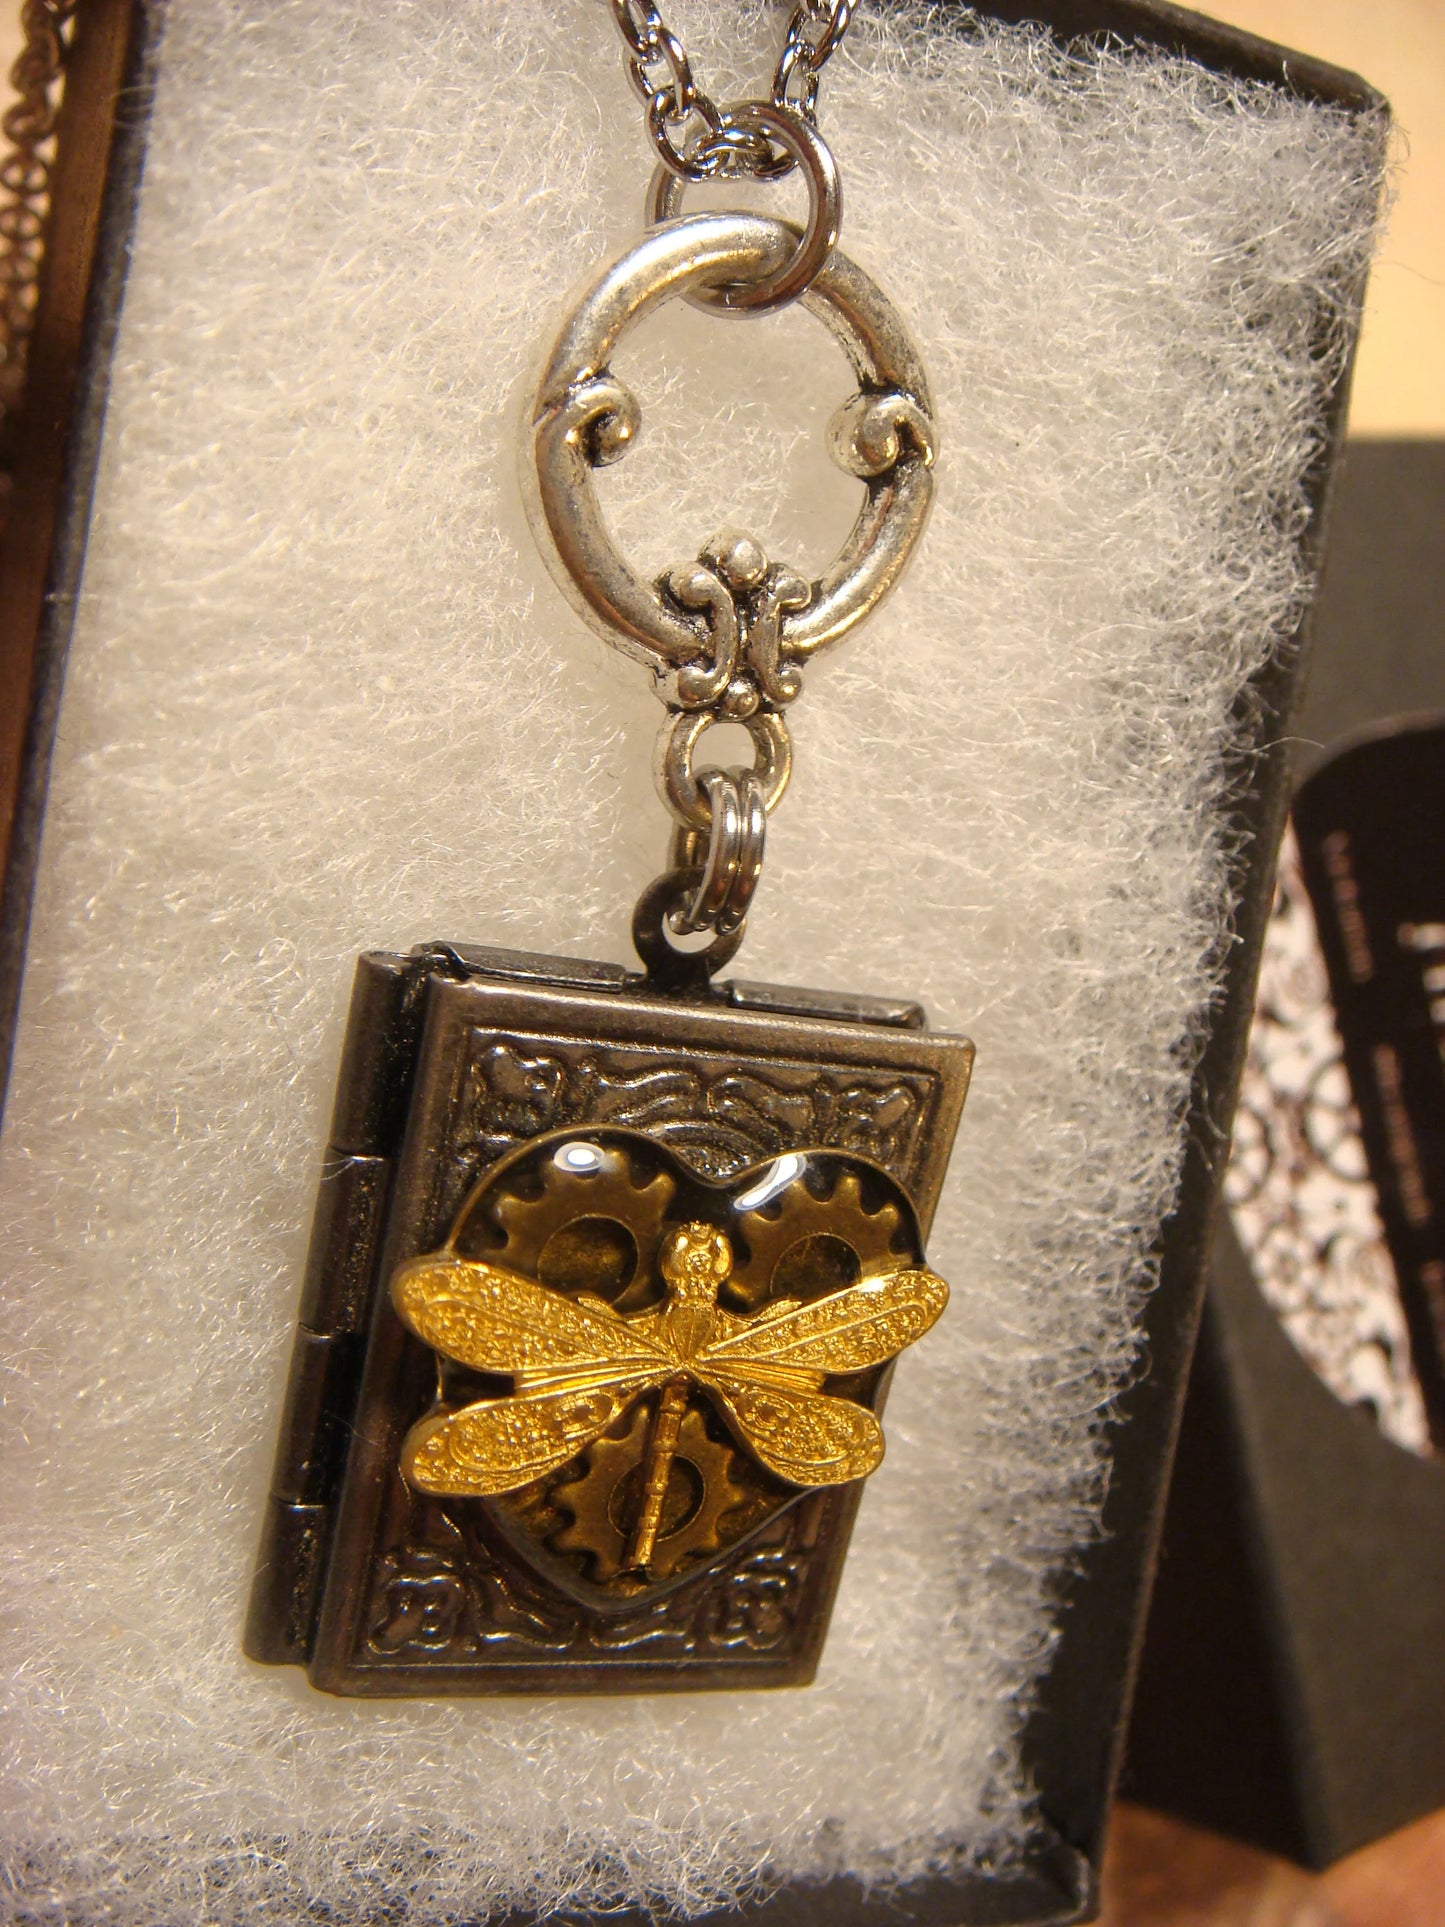 Dragonfly Gears Heart Book Locket Necklace